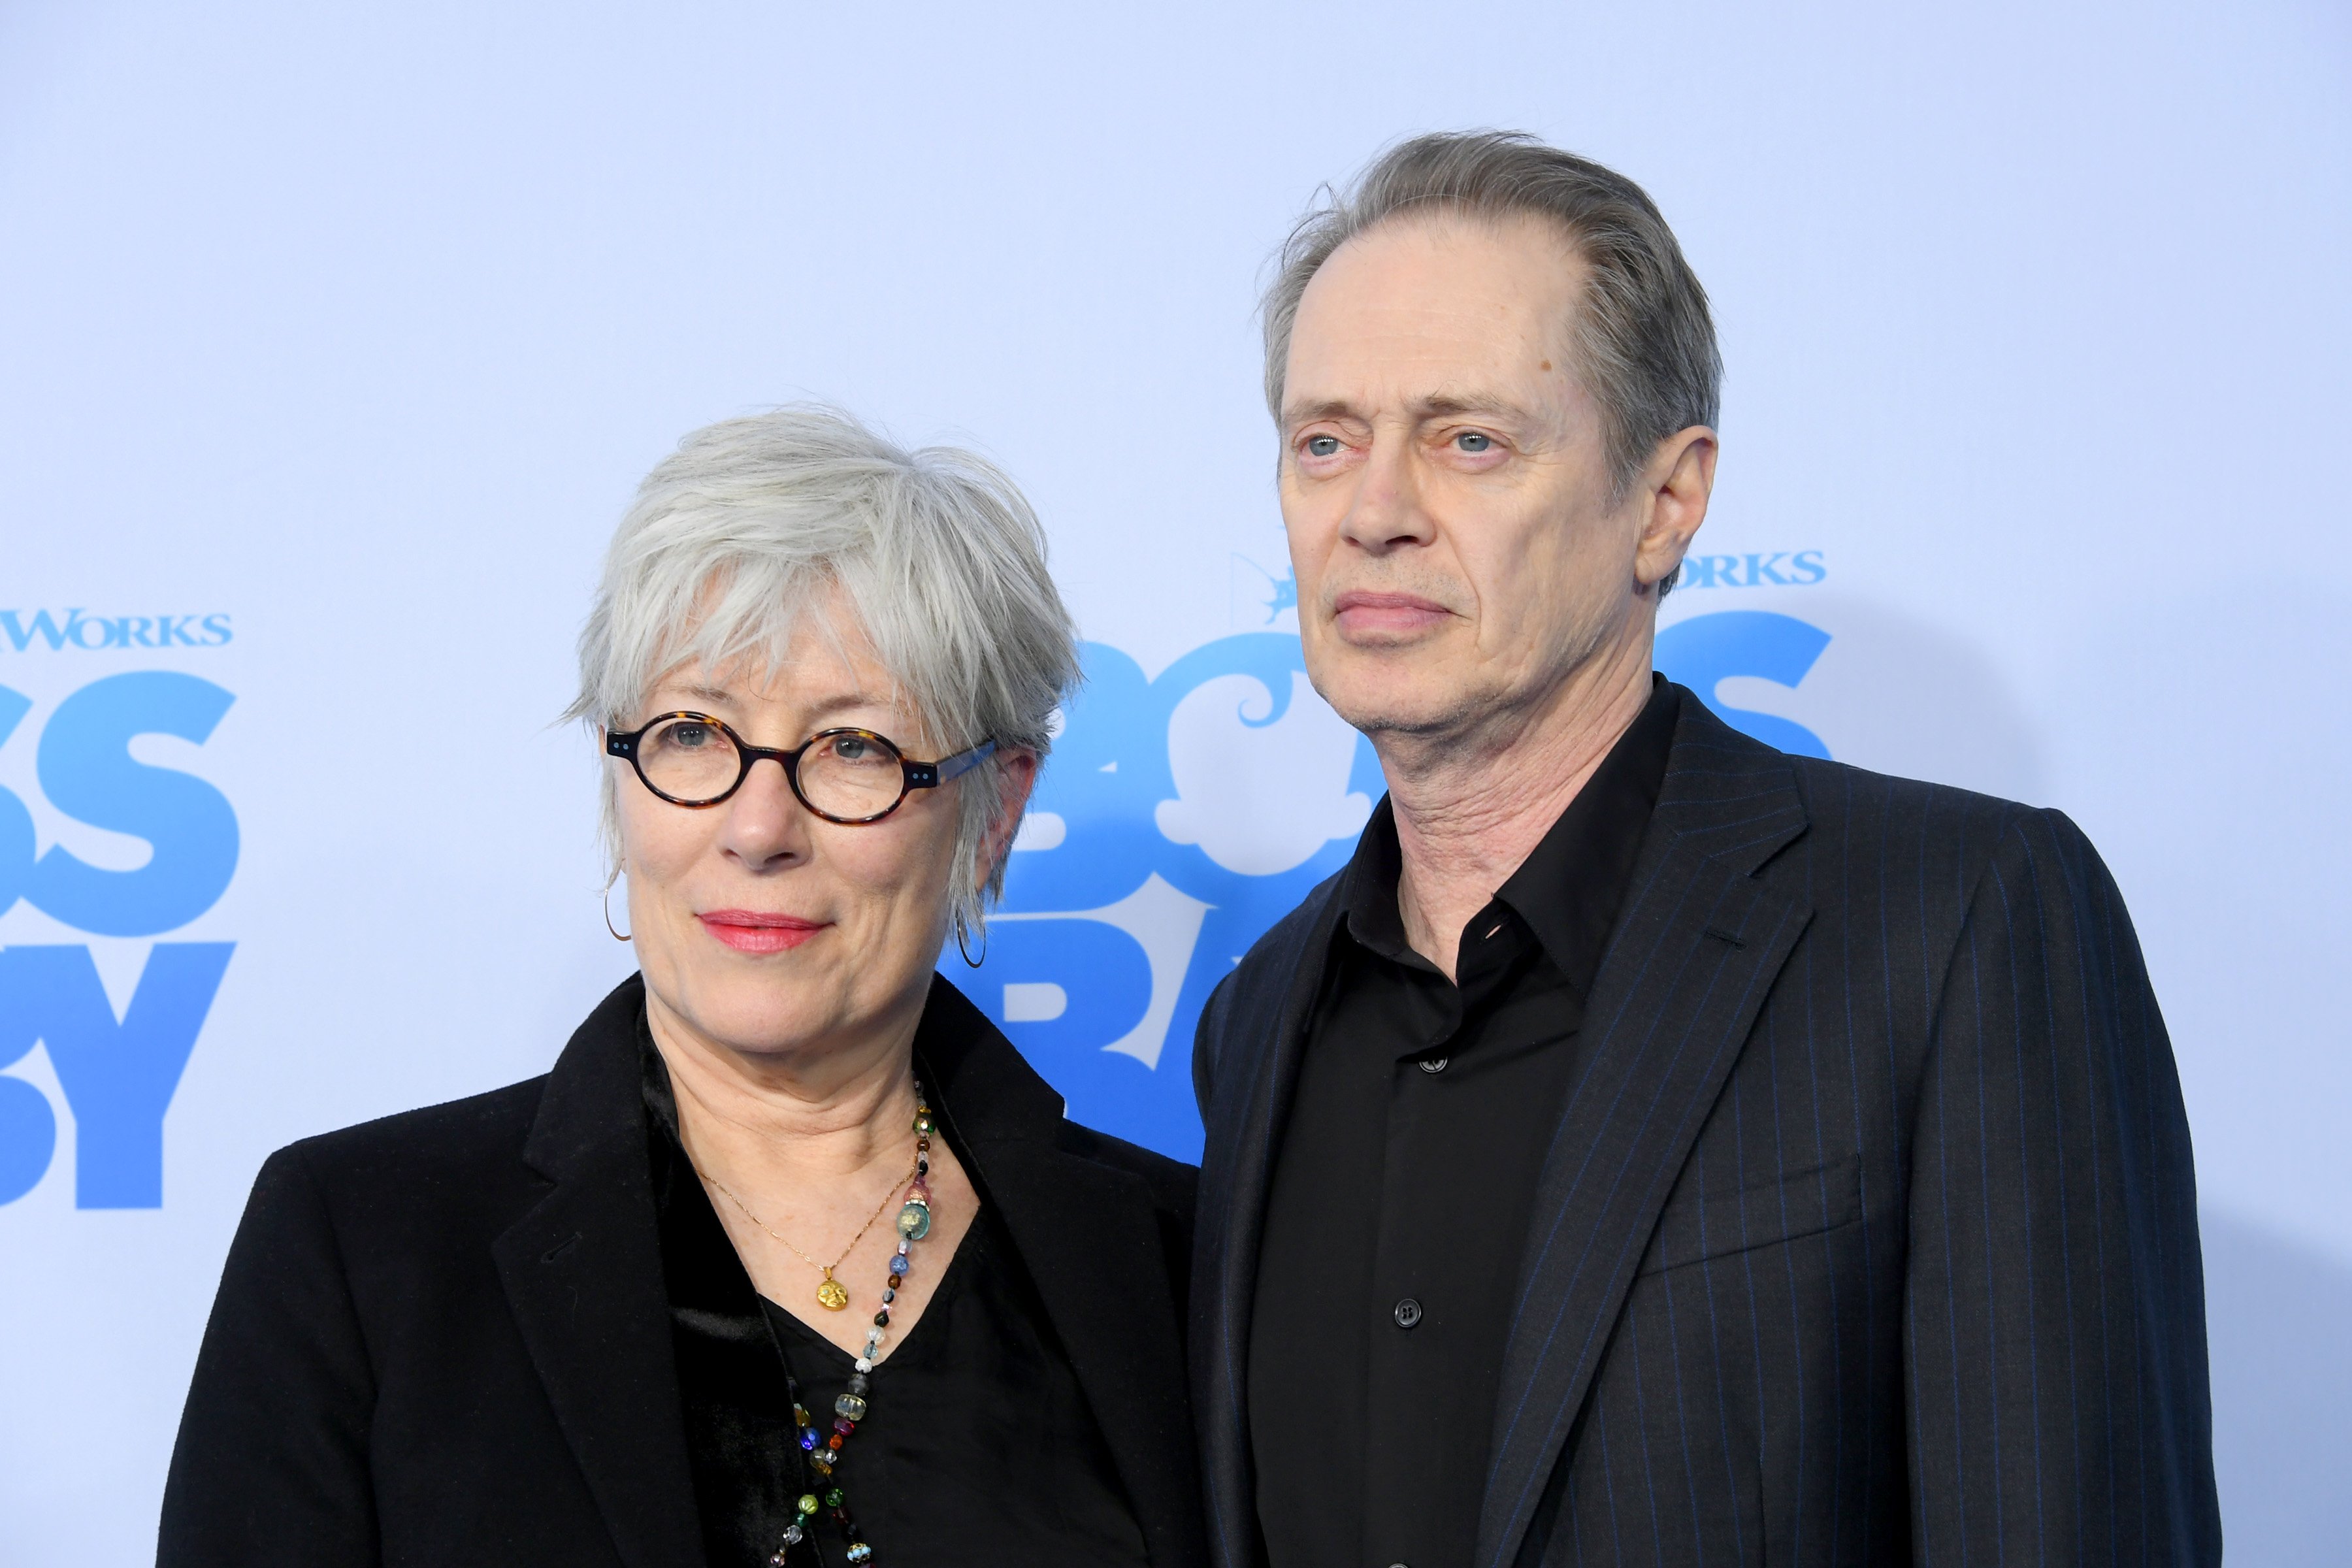 Jo Andres and Steve Buscemi attend "The Boss Baby" New York Premiere at AMC Loews Lincoln Square 13 theater on March 20, 2017 in New York City | Photo: GettyImages